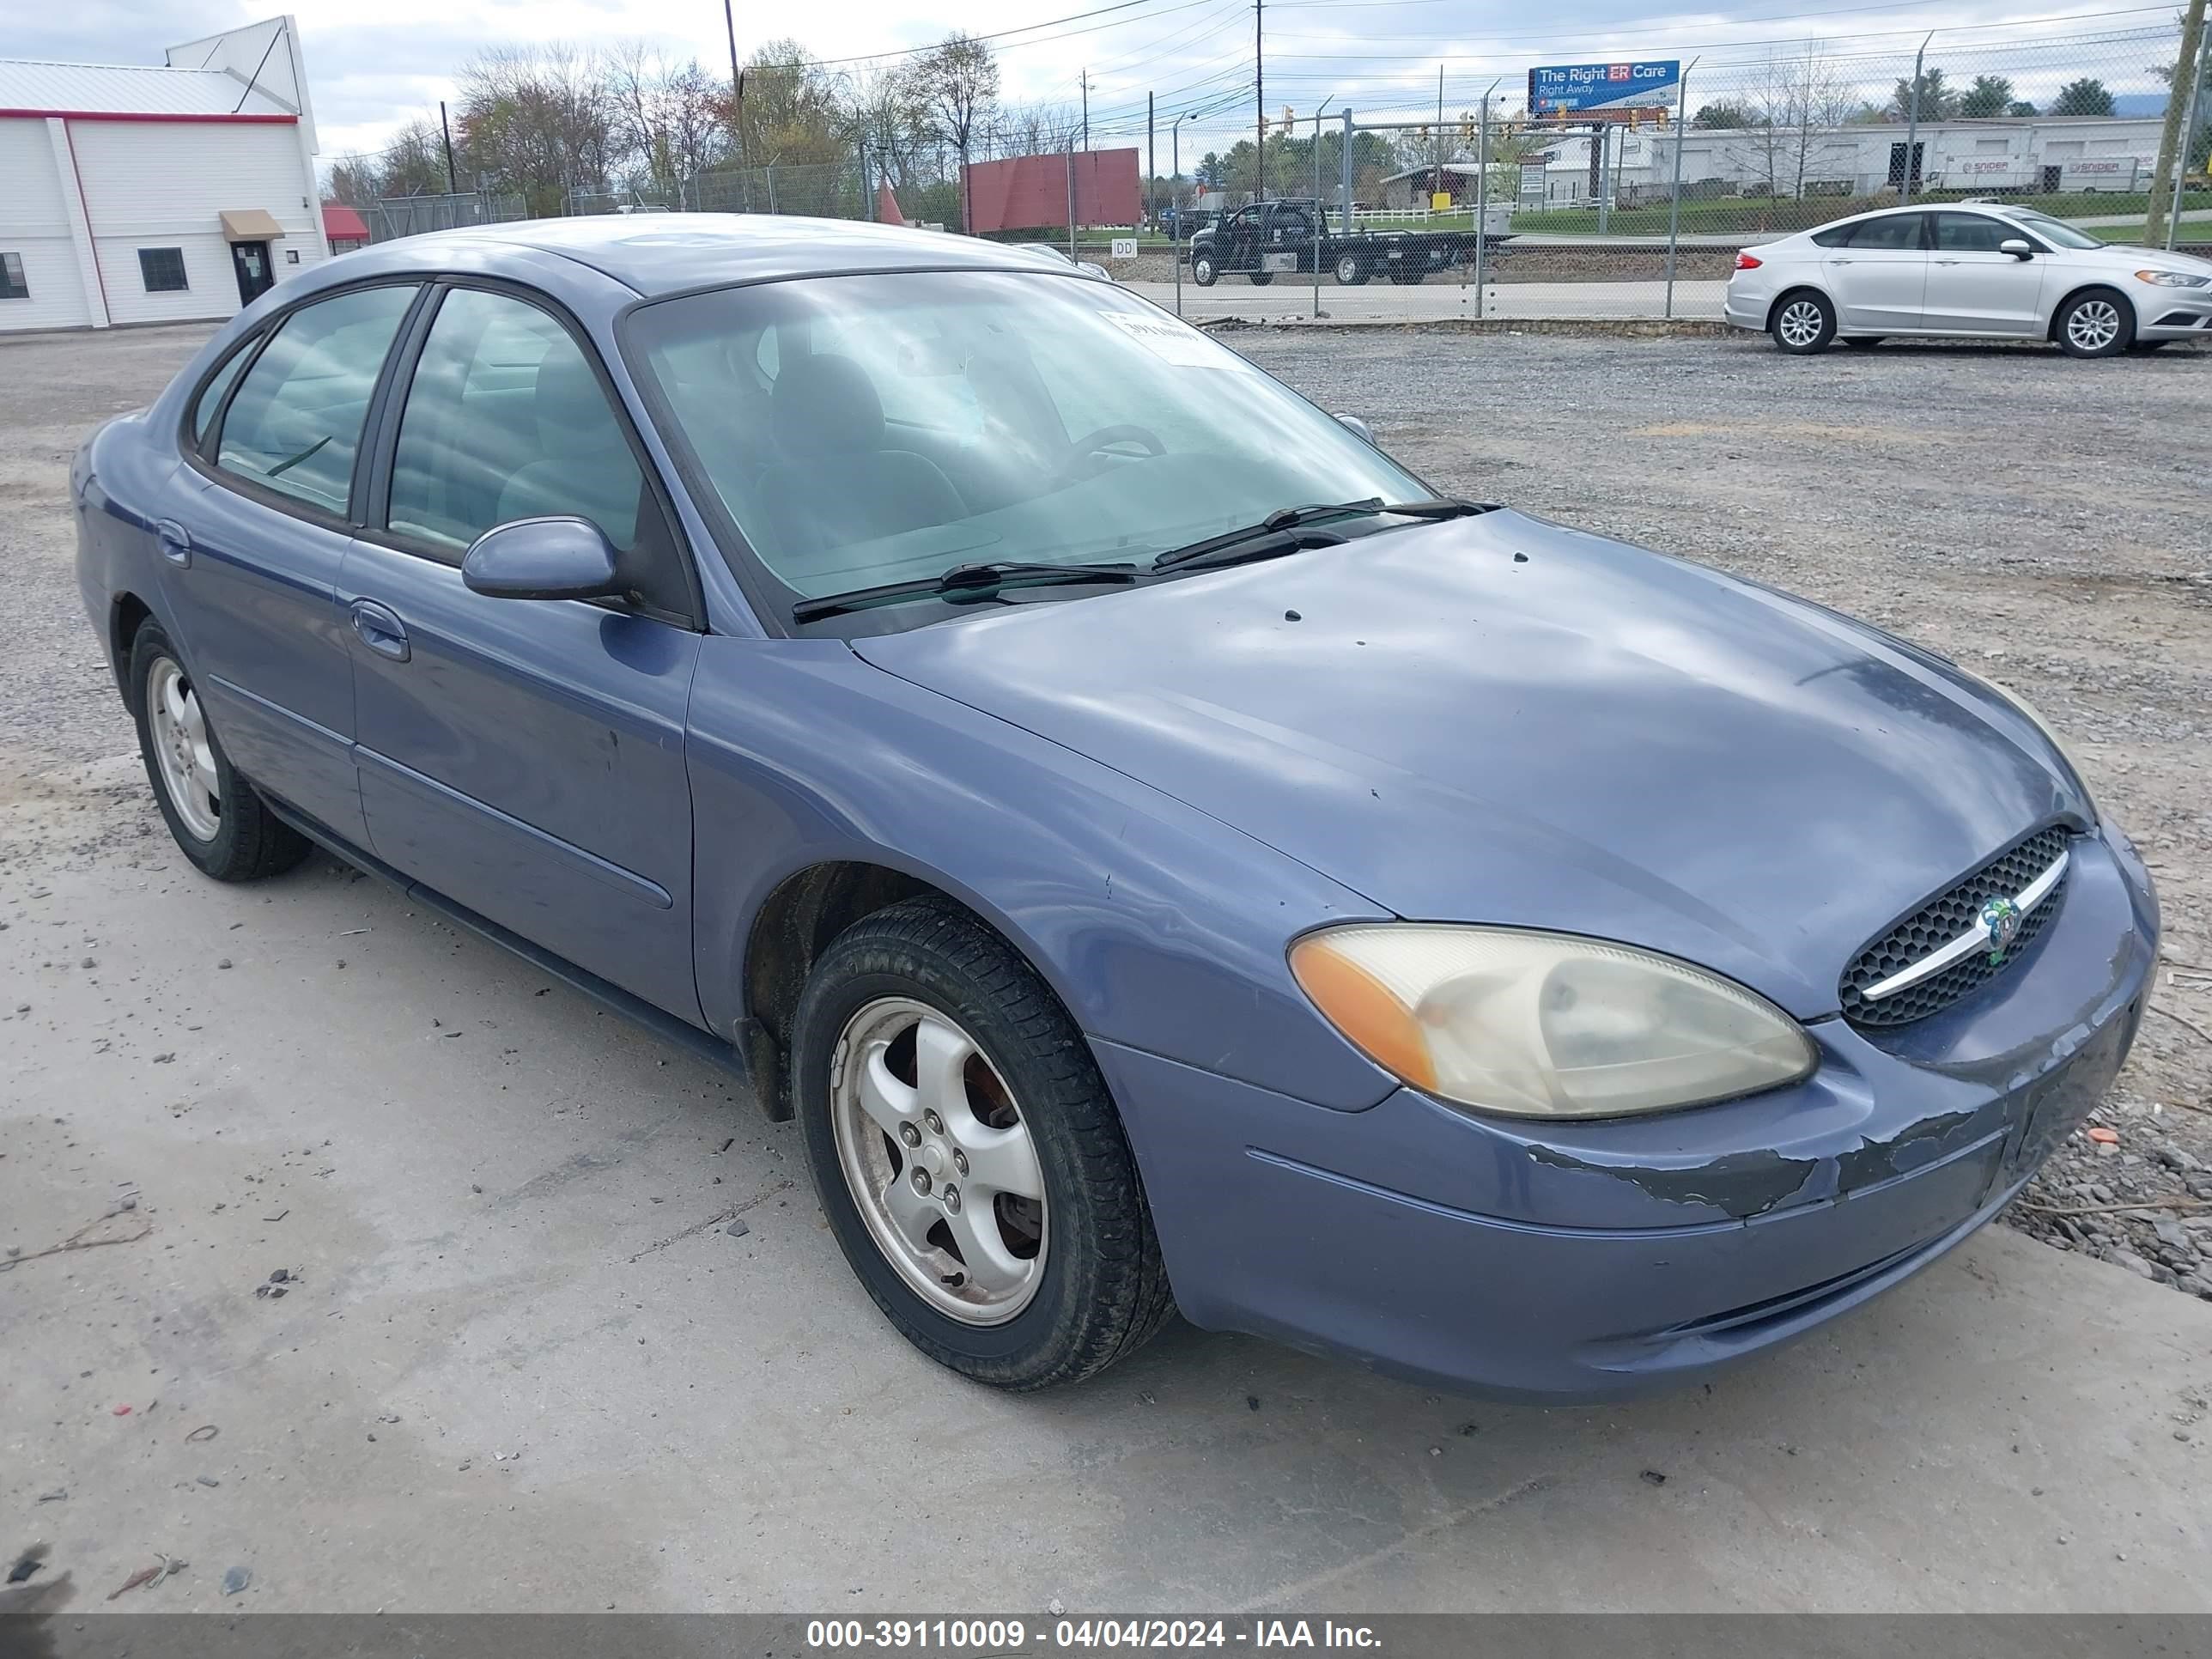 vin: 1FAFP52241A263577 1FAFP52241A263577 2001 ford taurus 3000 for Sale in 28732, 4900 Hendersonville Rd, Fletcher, North Carolina, USA